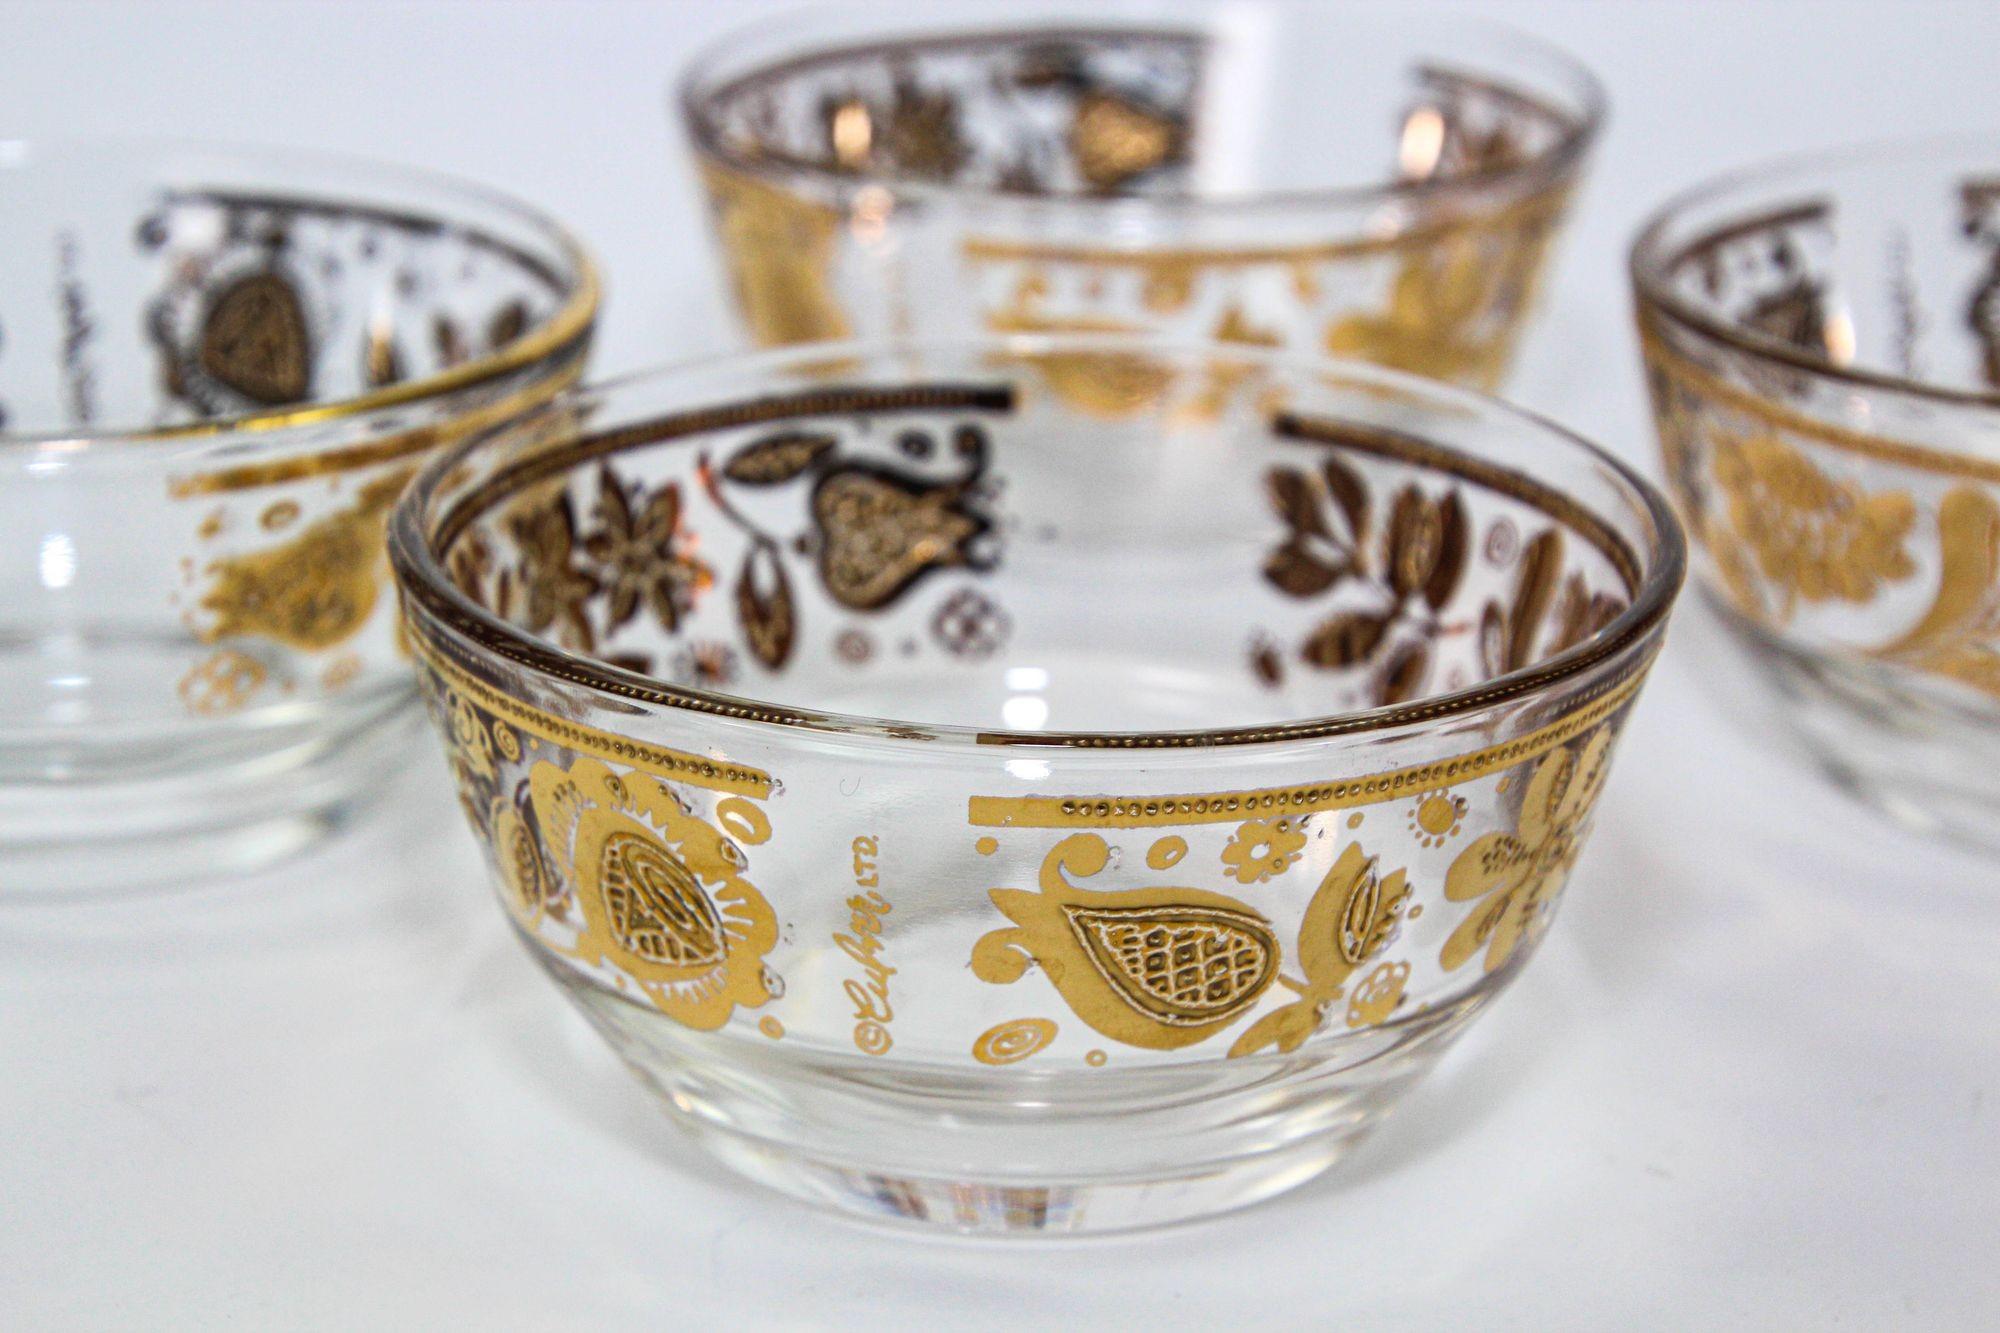 Vintage 22K Gold Leaf Appetizer Bowls by Culver, ltd. from the 1960s Set of 4.Hollywood Regency barware set of vintage Culver 22K gold leaf Chantilly floral pattern overlay set of 4 appetizer bowl by Culver, 1960s.Exquisite Culver Chantilly hostess